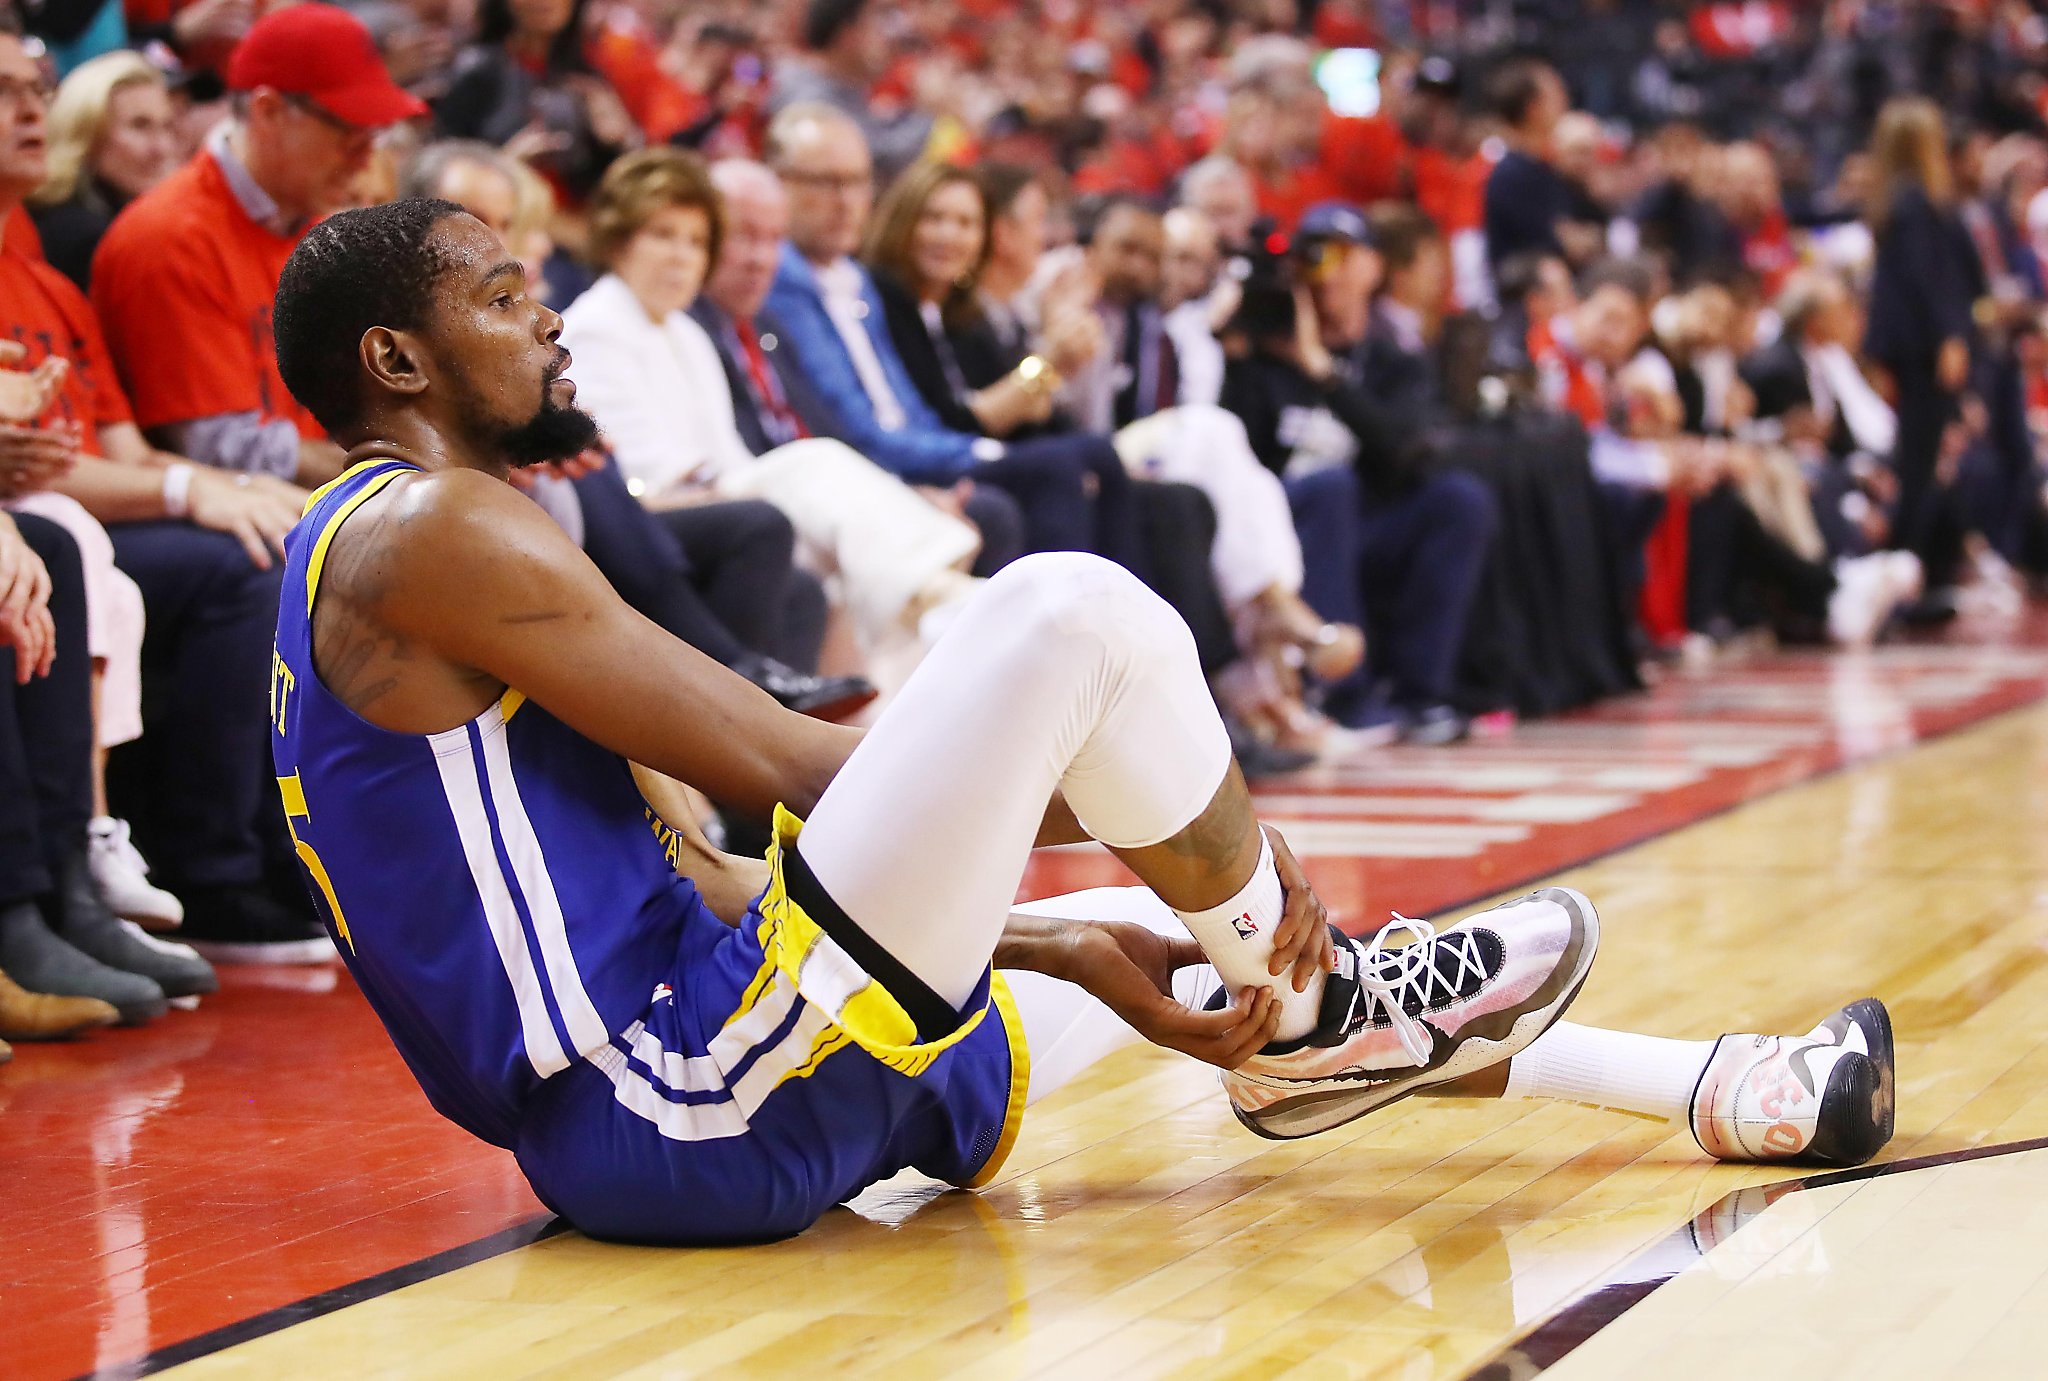 Here's the play Kevin Durant injured his Achilles on in Game 5 of NBA